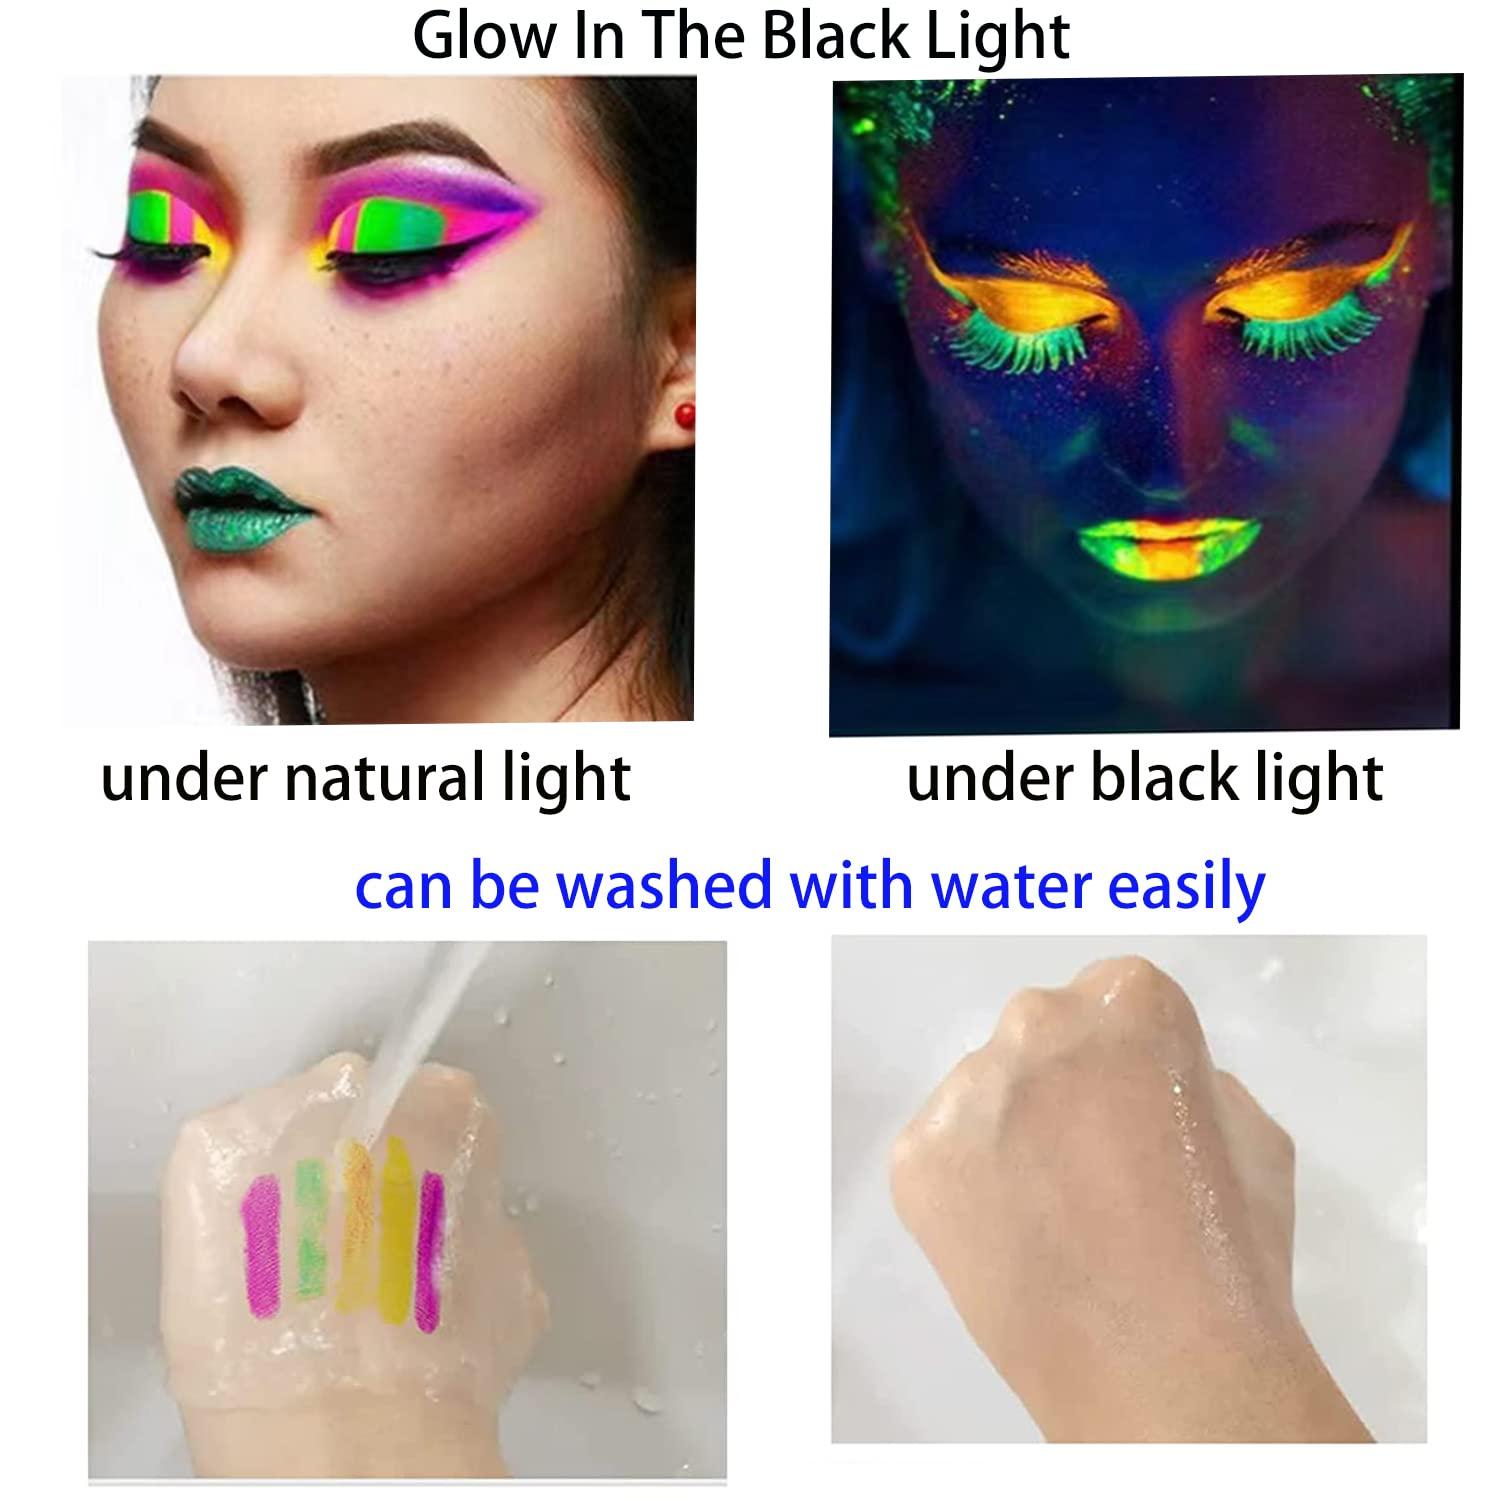 Body face Paint kit Fluorescent Party Halloween eye make up party